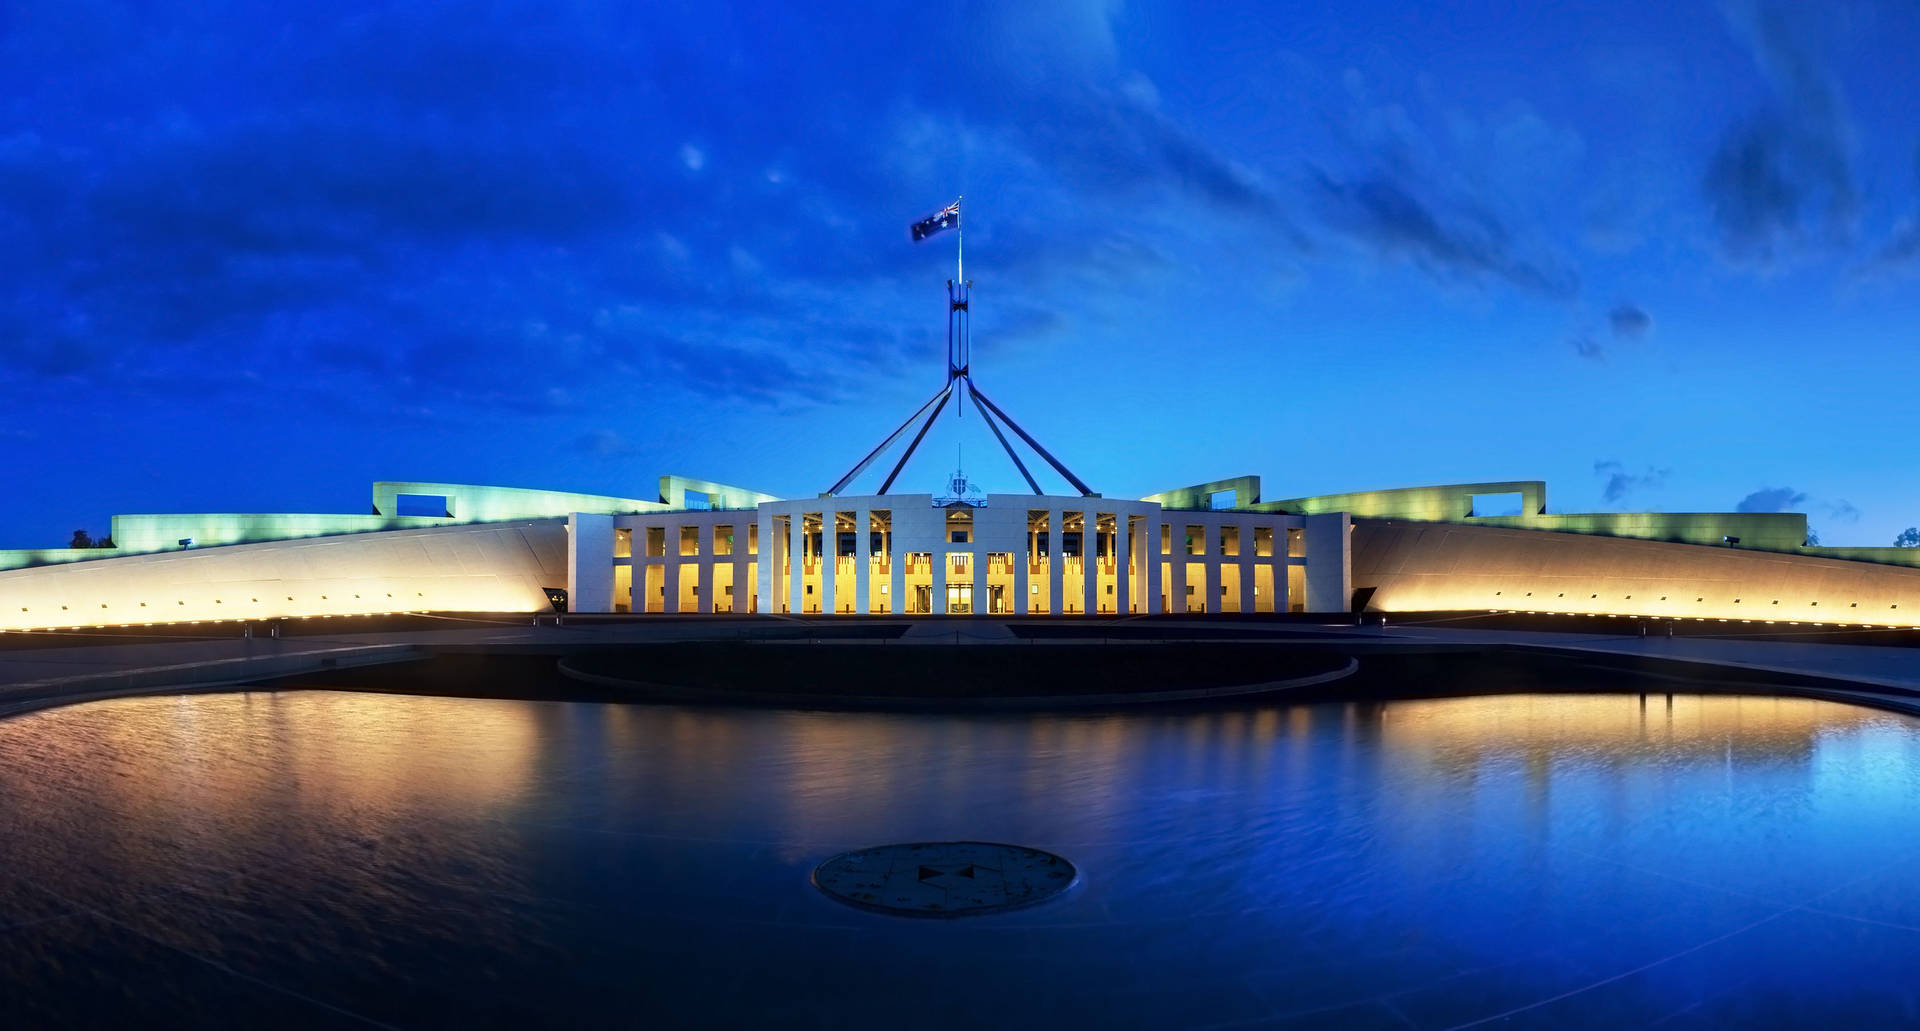 Canberra Parliament House Nighttime Photograph Background